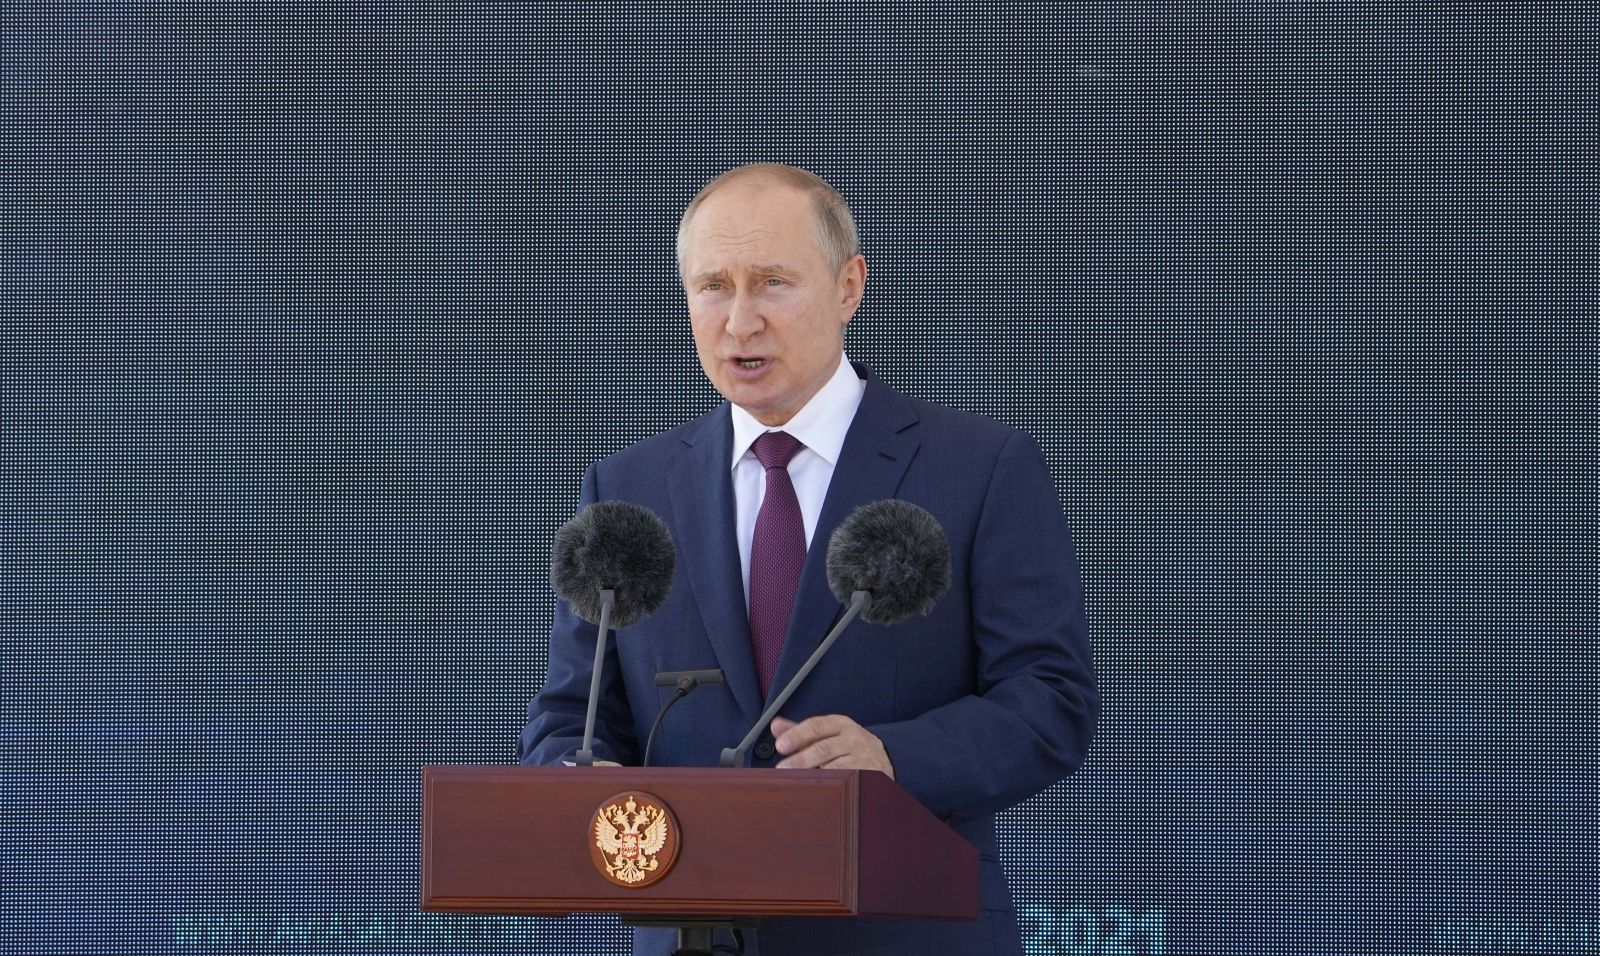 epa09354859 Russian President Vladimir Putin speaks at the opening of the MAKS-2021 International Aviation and Space Salon in Zhukovsky outside Moscow, Russia, 20 July 2021. Russia on 20 July unveiled a prototype of its prospective new fighter jet at the Moscow air show. MAKS 2021 International Aviation and Space Salon takes place from 20 to 25 July.  EPA/ALEXANDER ZEMLIANICHENKO/POOL